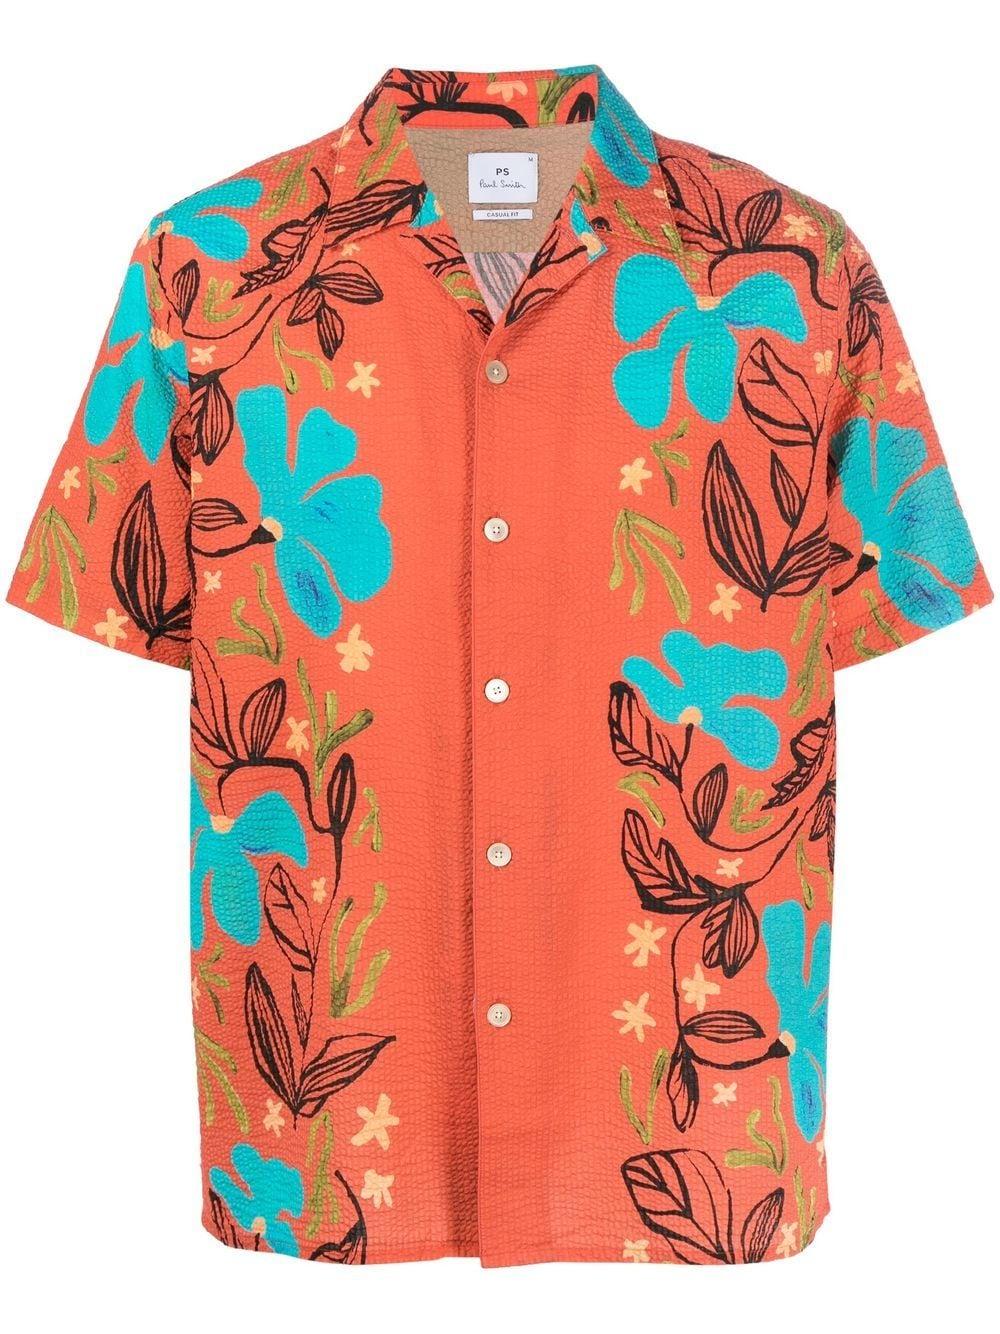 PS by Paul Smith Printed Short Sleeve Shirt in Orange for Men | Lyst